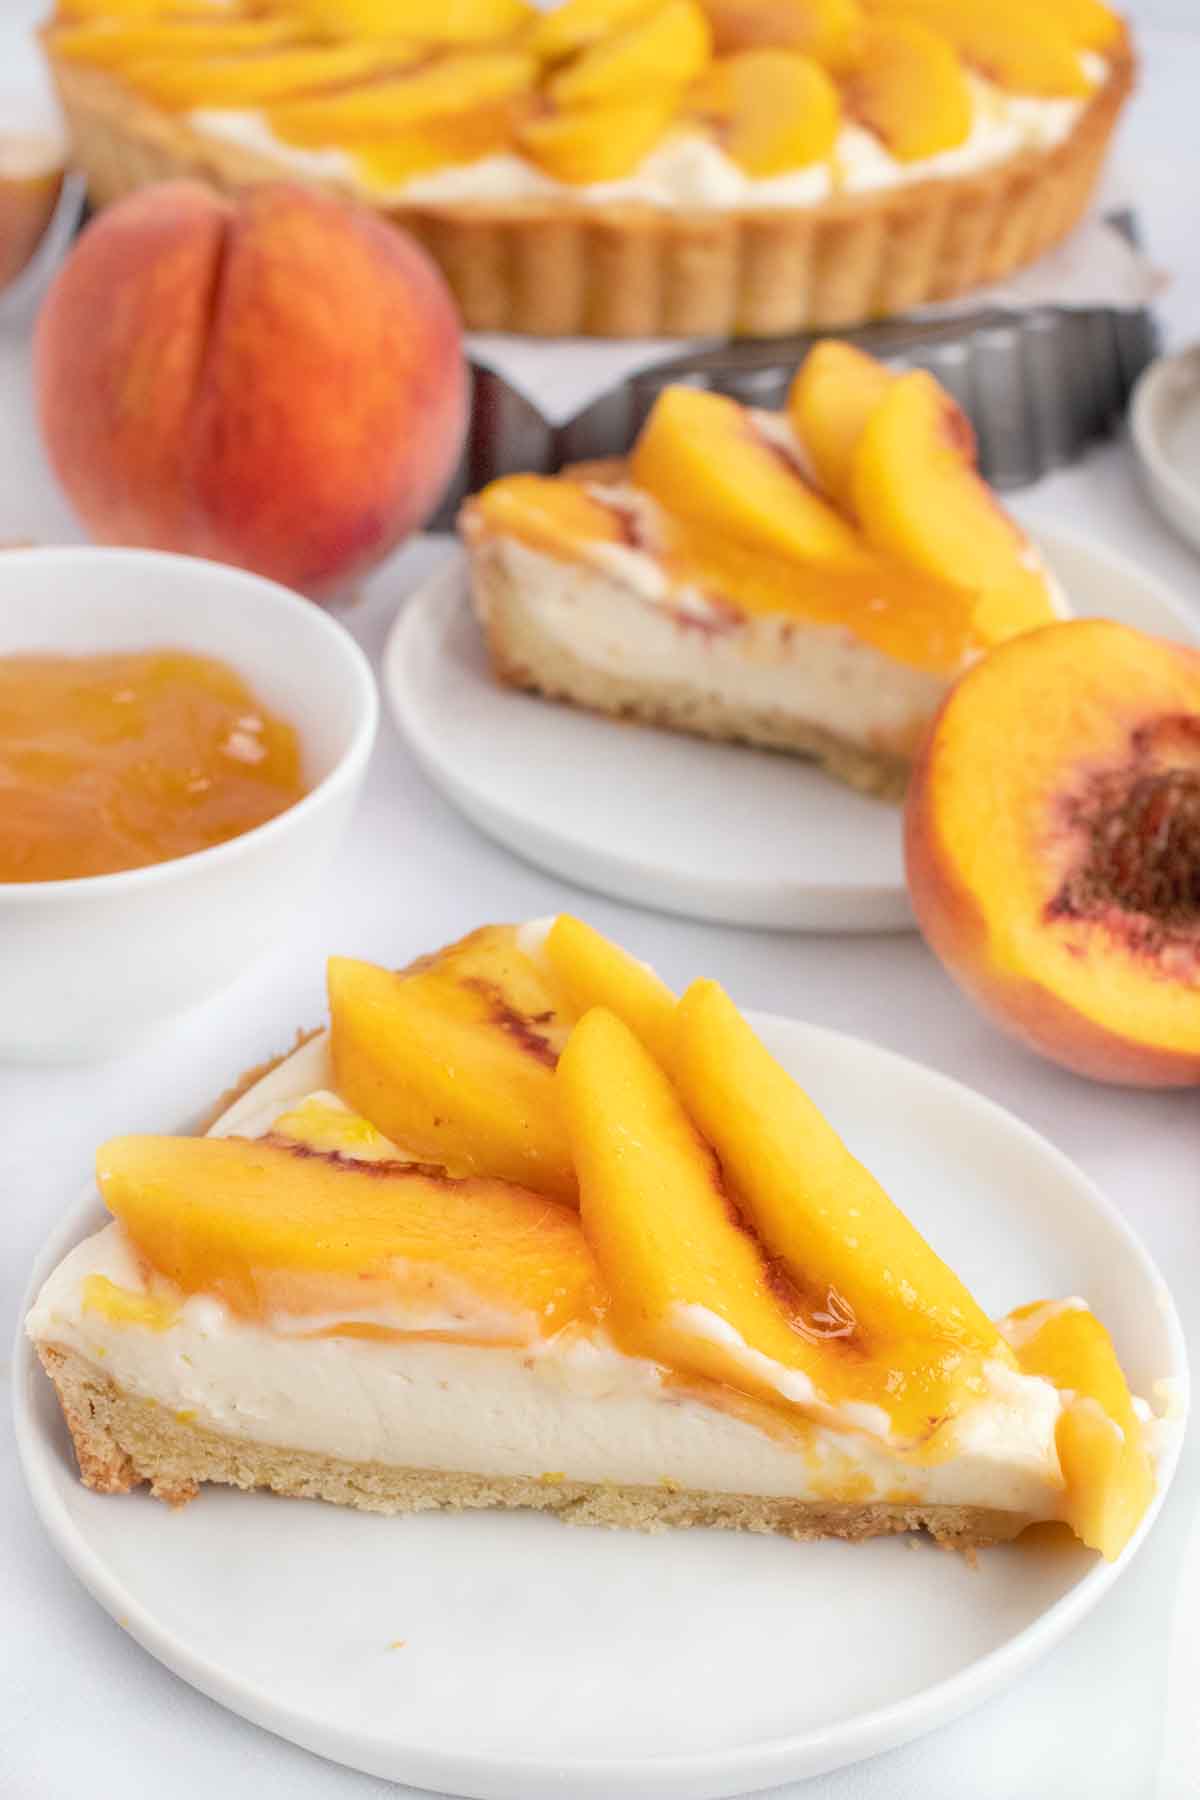 two slices of peach tart on white plates with whole tart behind them